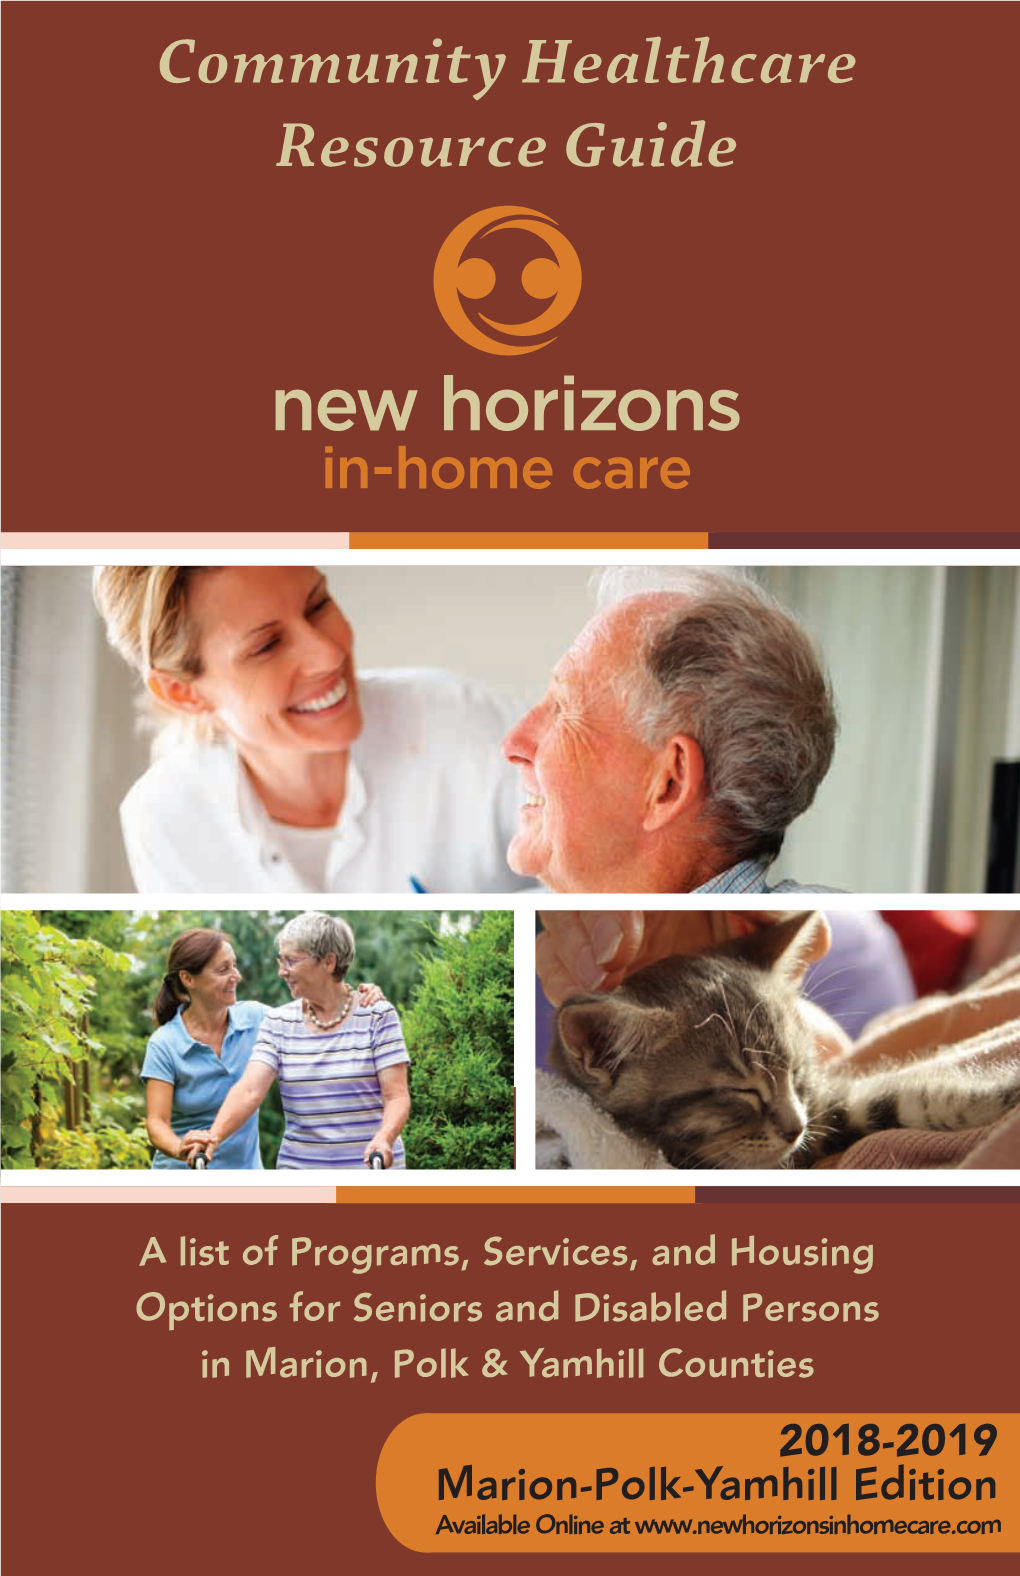 A List of Programs, Services, and Housing Options for Seniors and Disabled Persons in Marion, Polk & Yamhill Counties